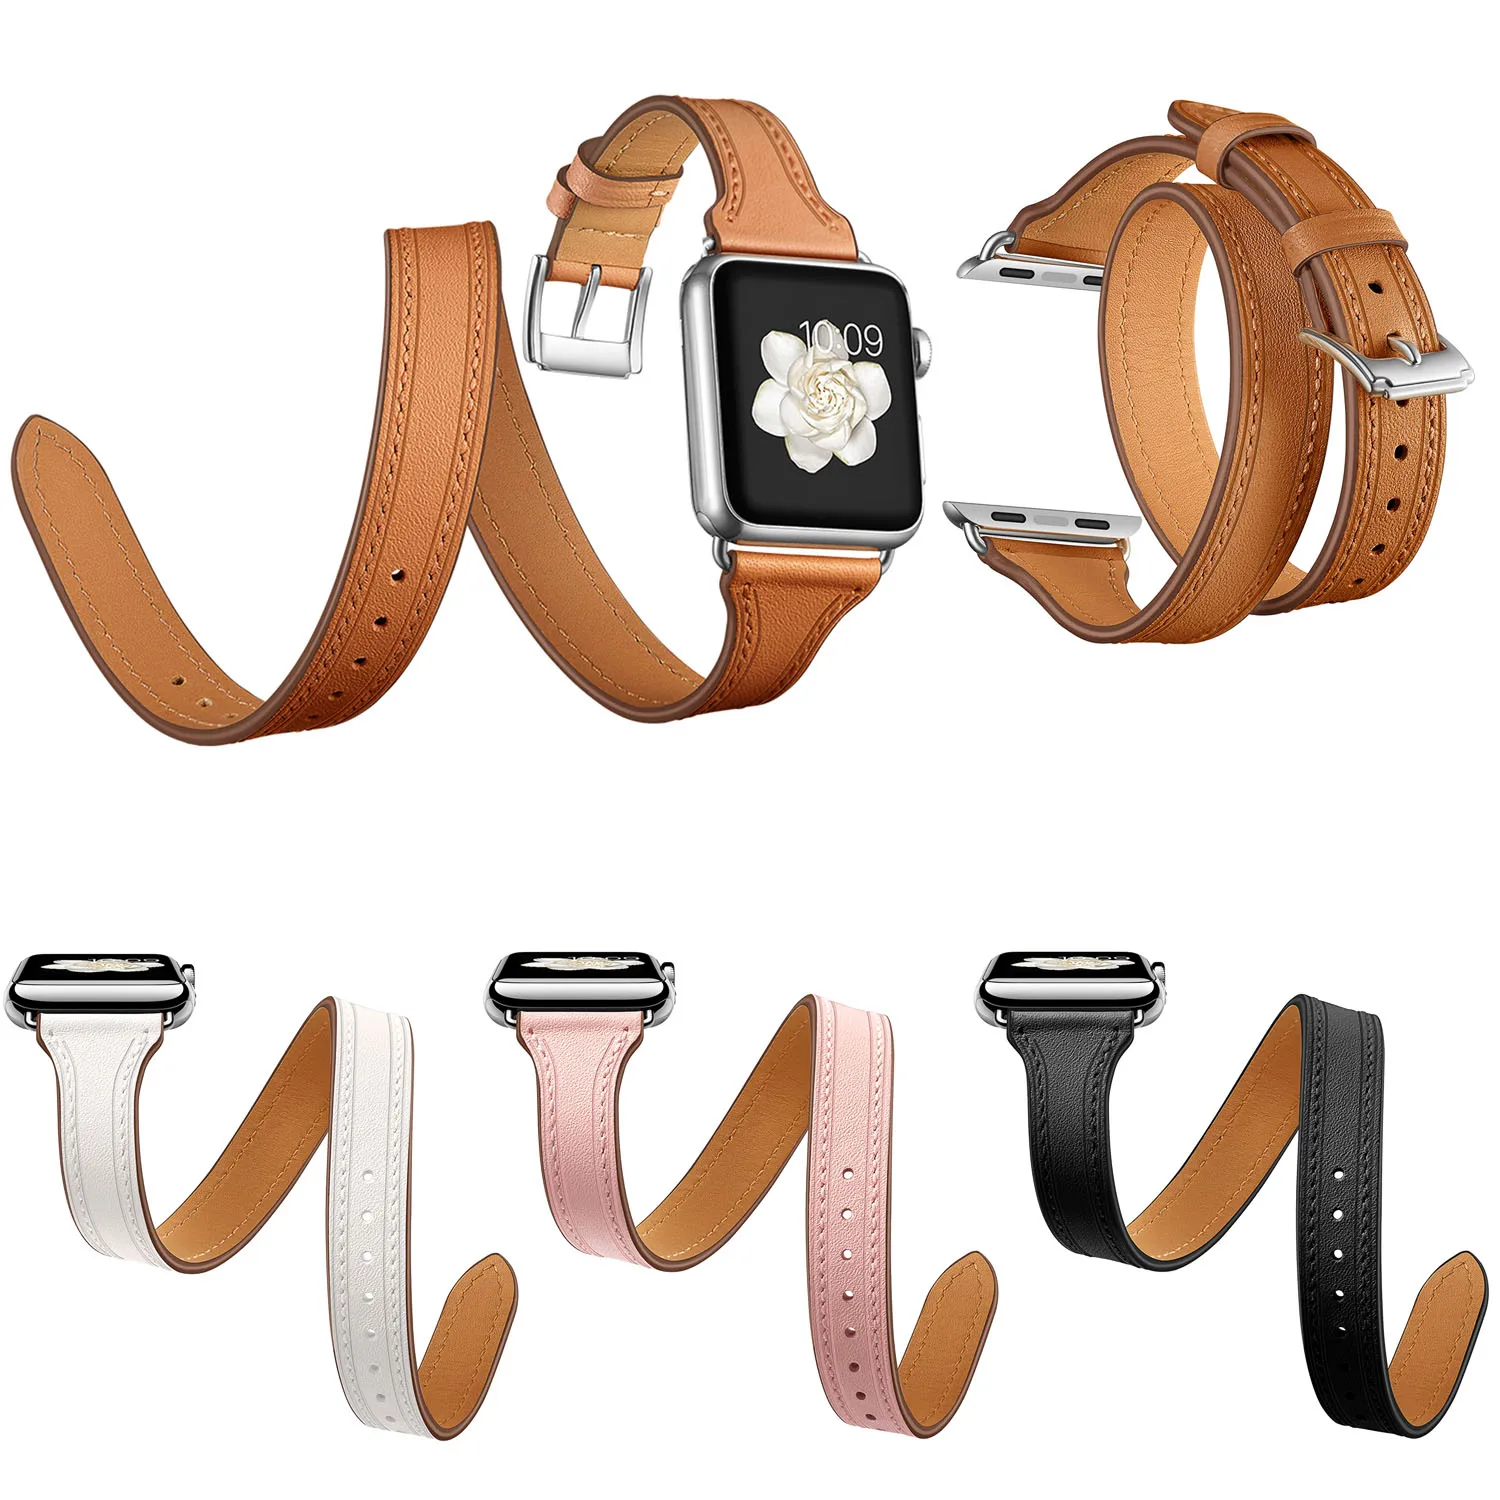 

Bracelet Band For Apple Watch Genuine Leather Strap 42mm 38mm 44mm 40mm iWatch Series 4 3 2 1 Double Tour Wrist Watchband Belt